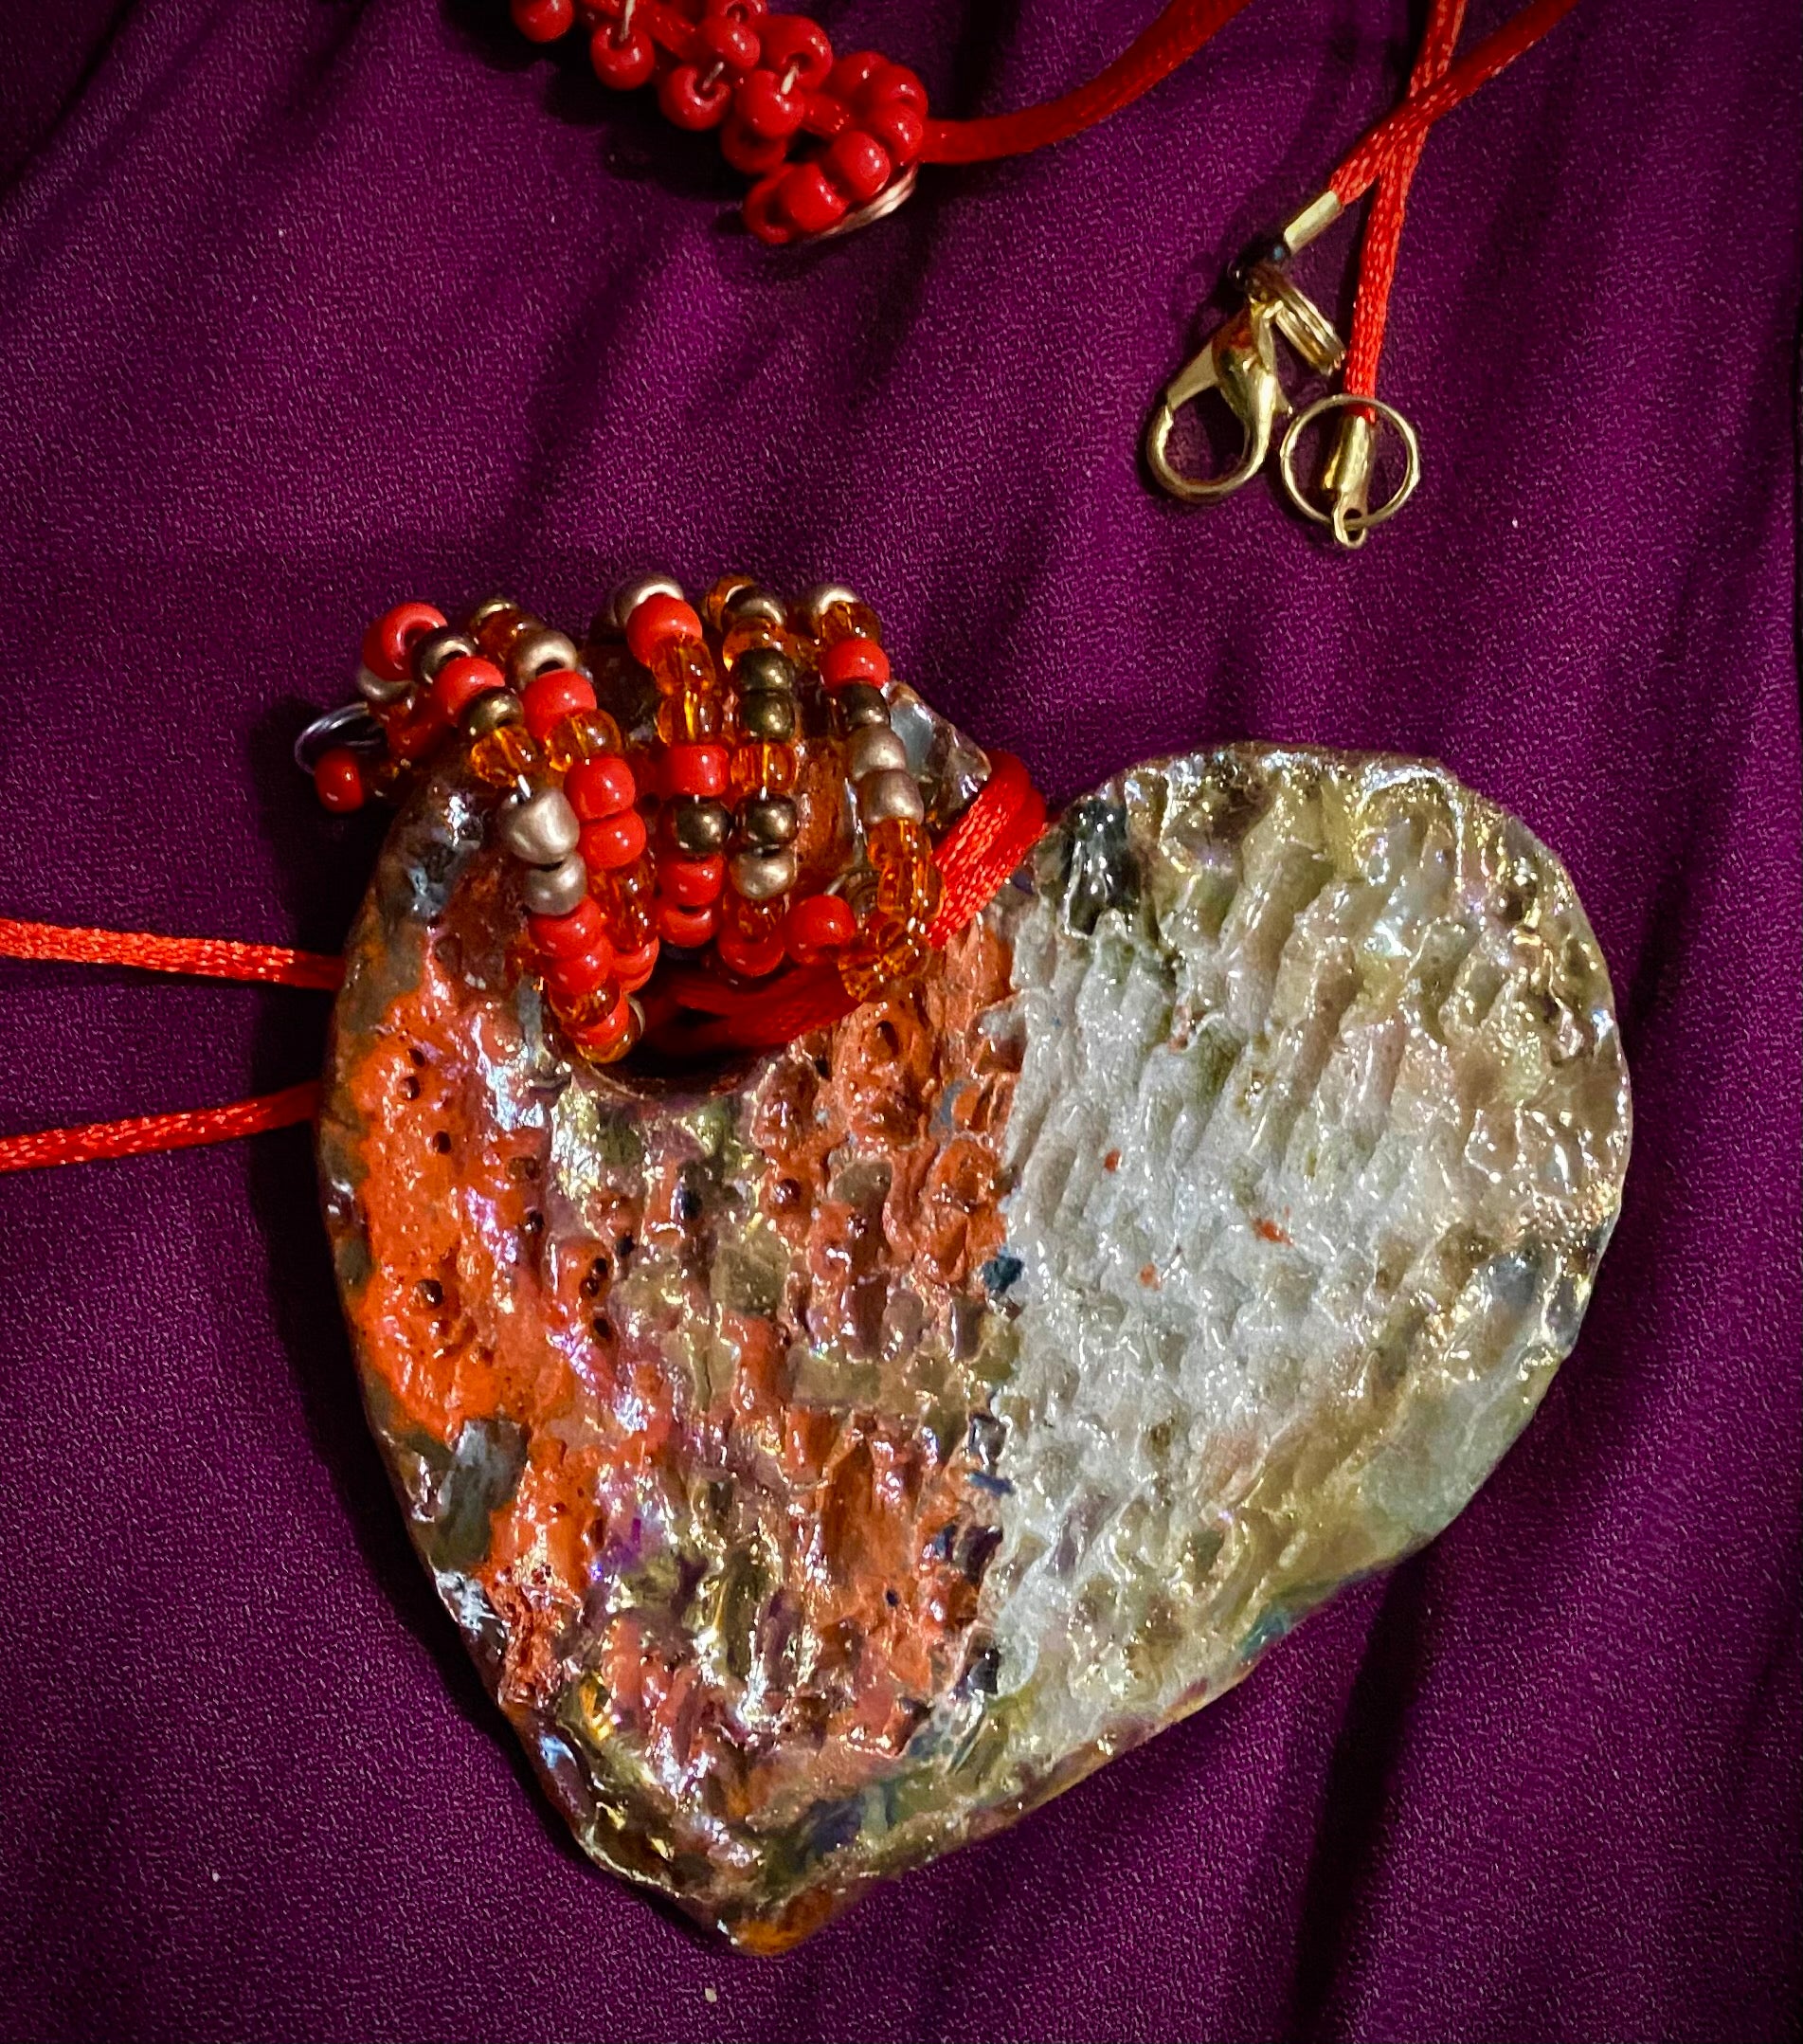 Have A Heart! Each heart pendant is handmade with love! It is 3"x 3"and weighs approx. 3ozs. This pendant has a red,orange, white and copper metallic raku glazes that renders a unique translucent  patina. The heart has a textured pattern . Both sides are  are different and equally beautiful! There is a spiral of red mini beads on copper in the center. This pendant has a nice 12" red adjustable rattail cord!